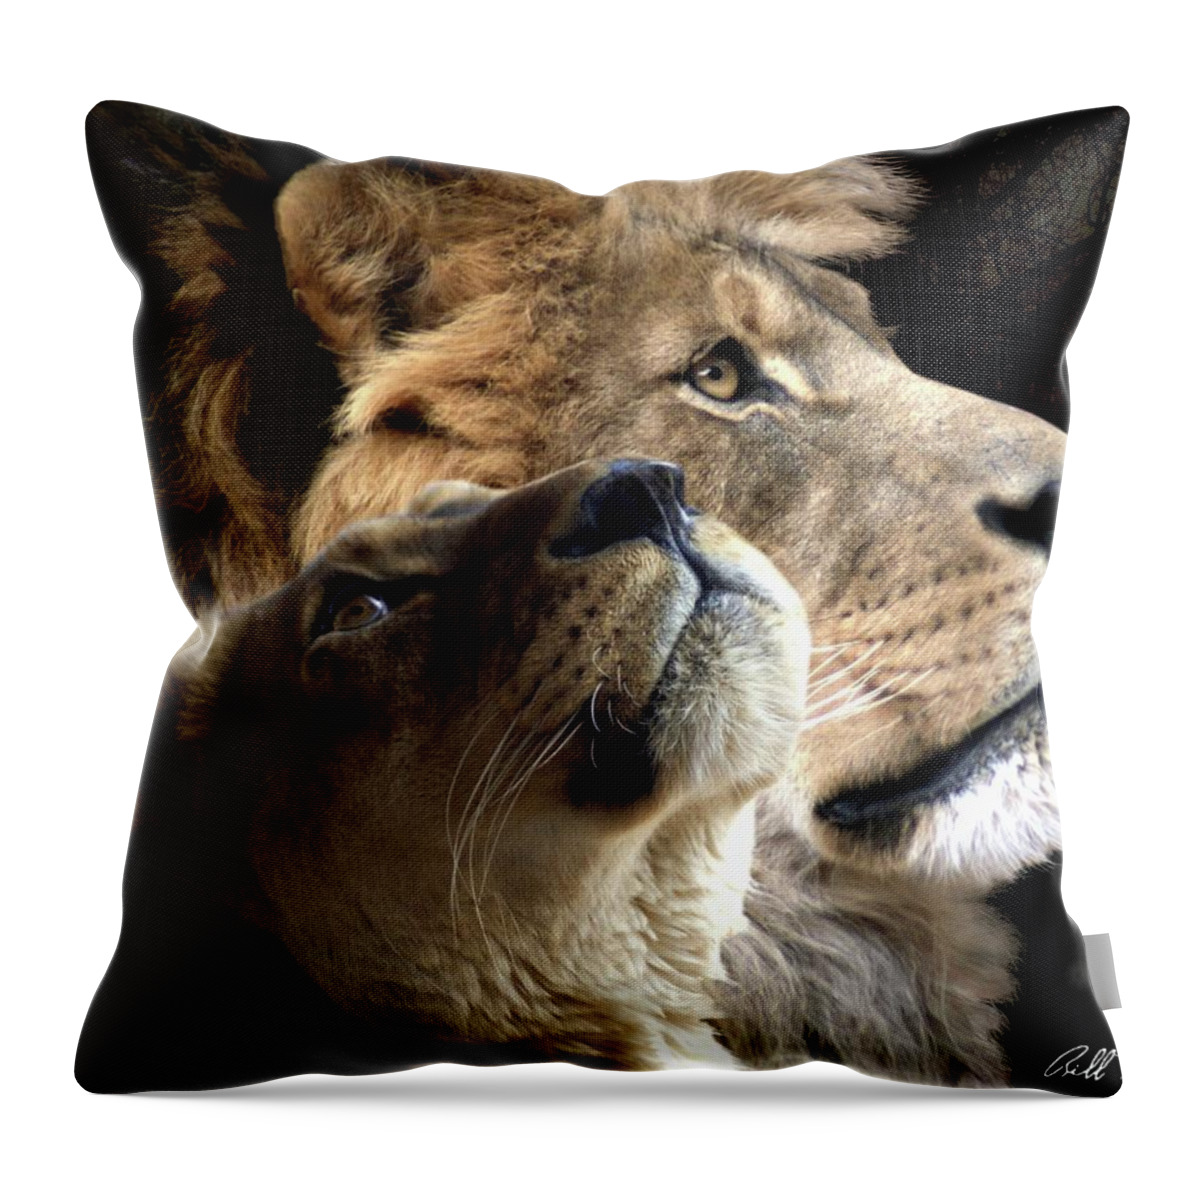 Lions Throw Pillow featuring the digital art Sharing The Vision 2 by Bill Stephens